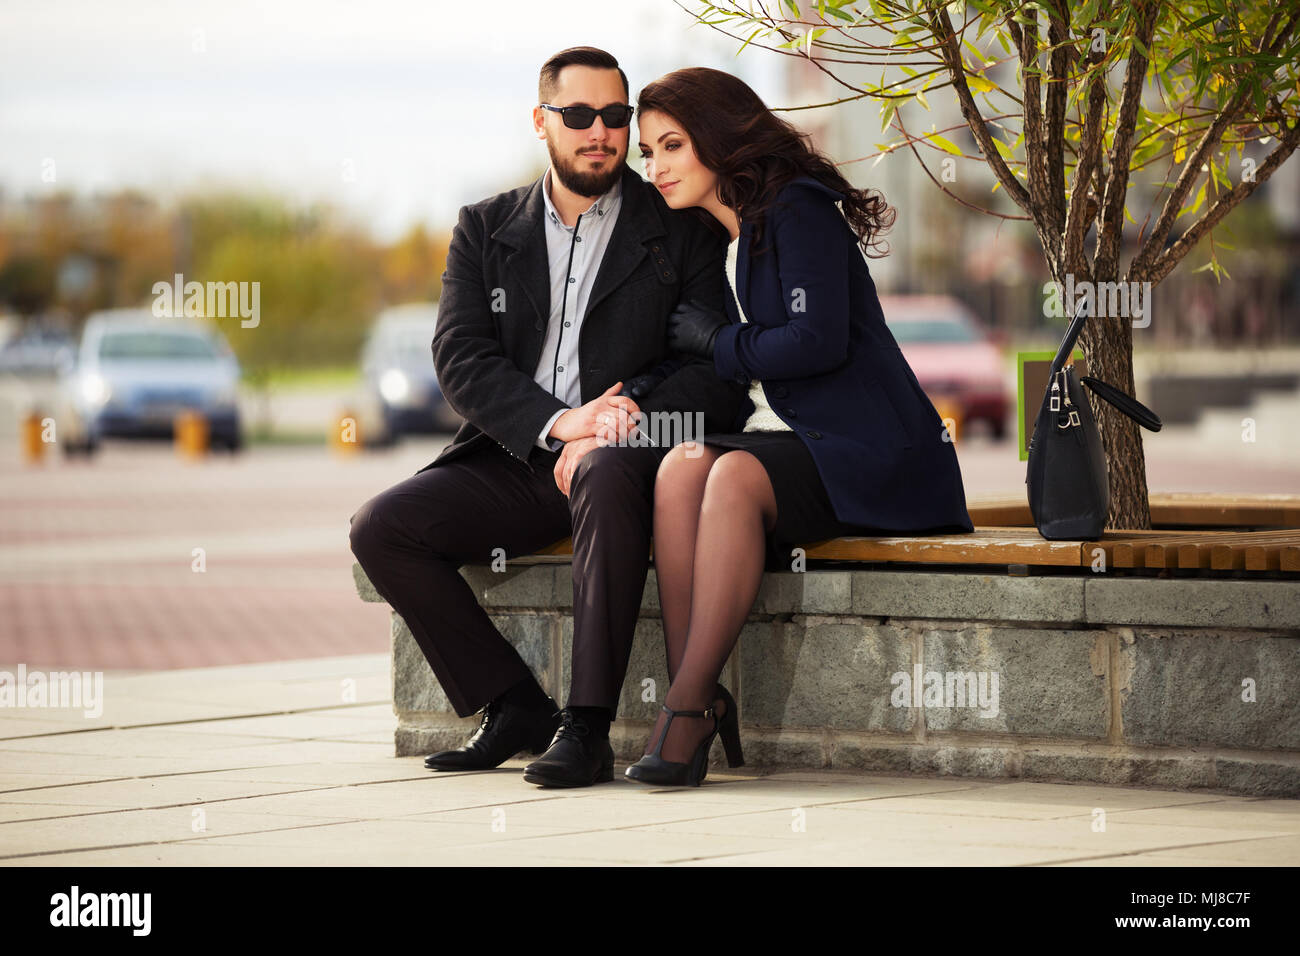 Young fashion couple in love on city street Stock Photo